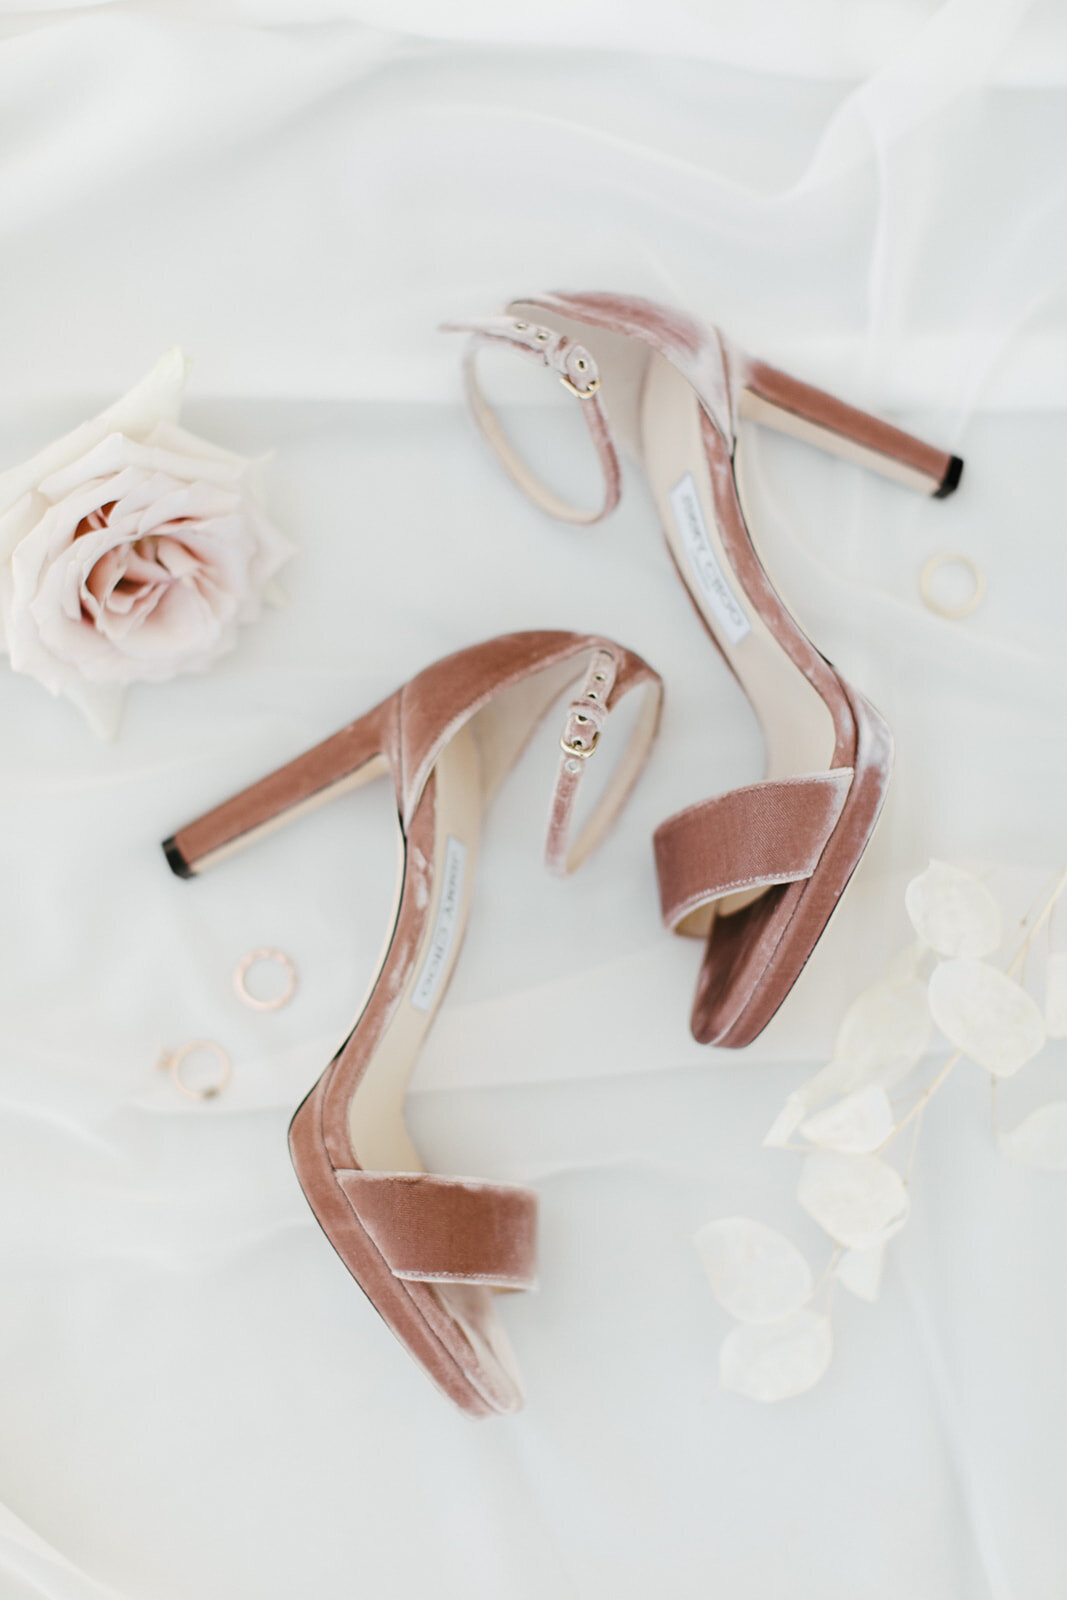 Pink shoes are styled in a flatlay with dried blooms.